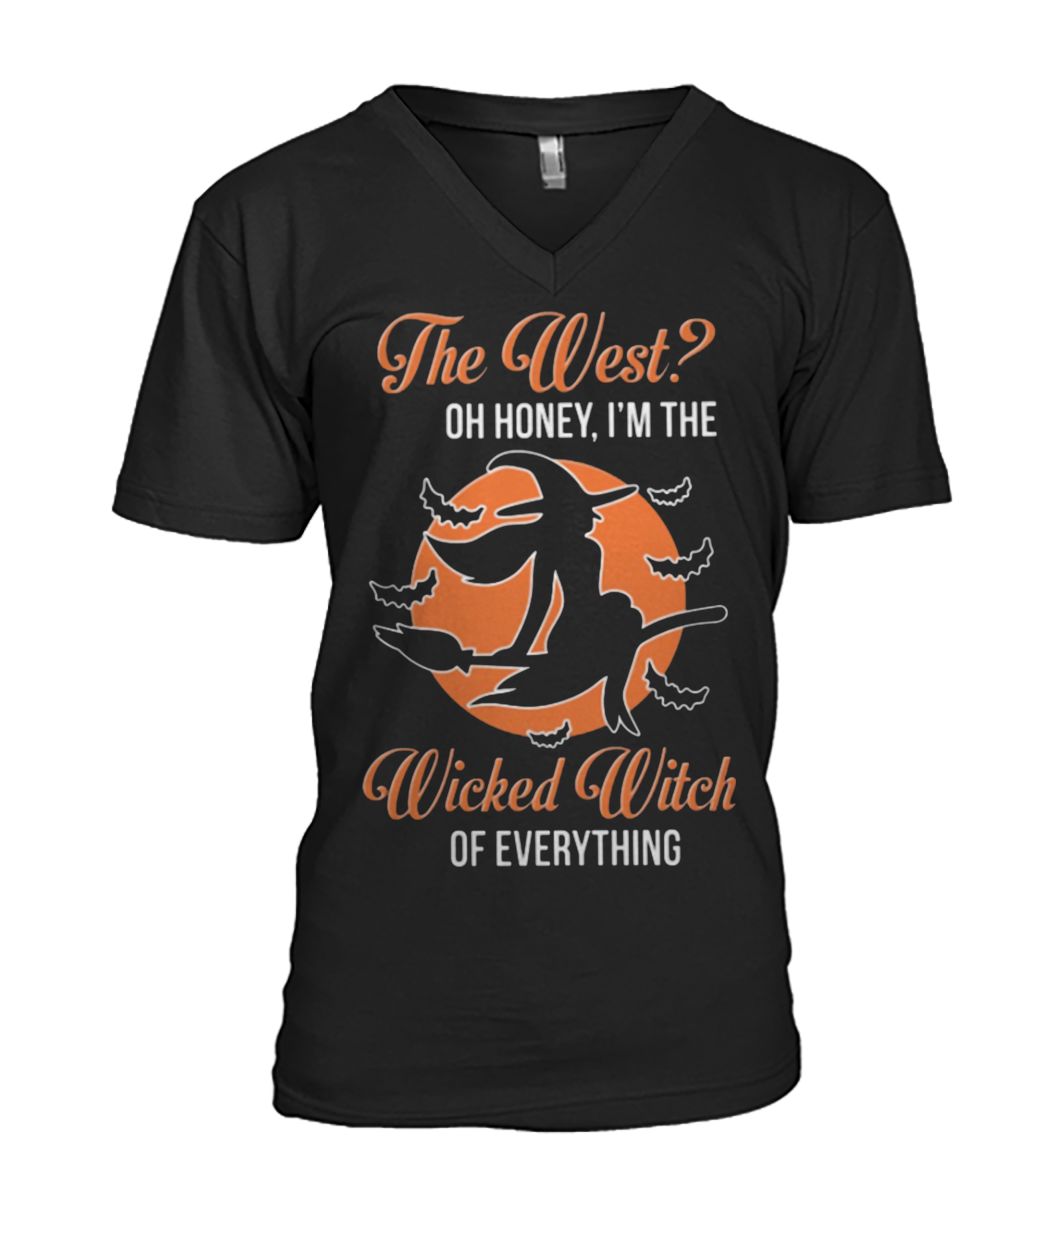 The west oh honey I'm the wicked witch of everything mens v-neck